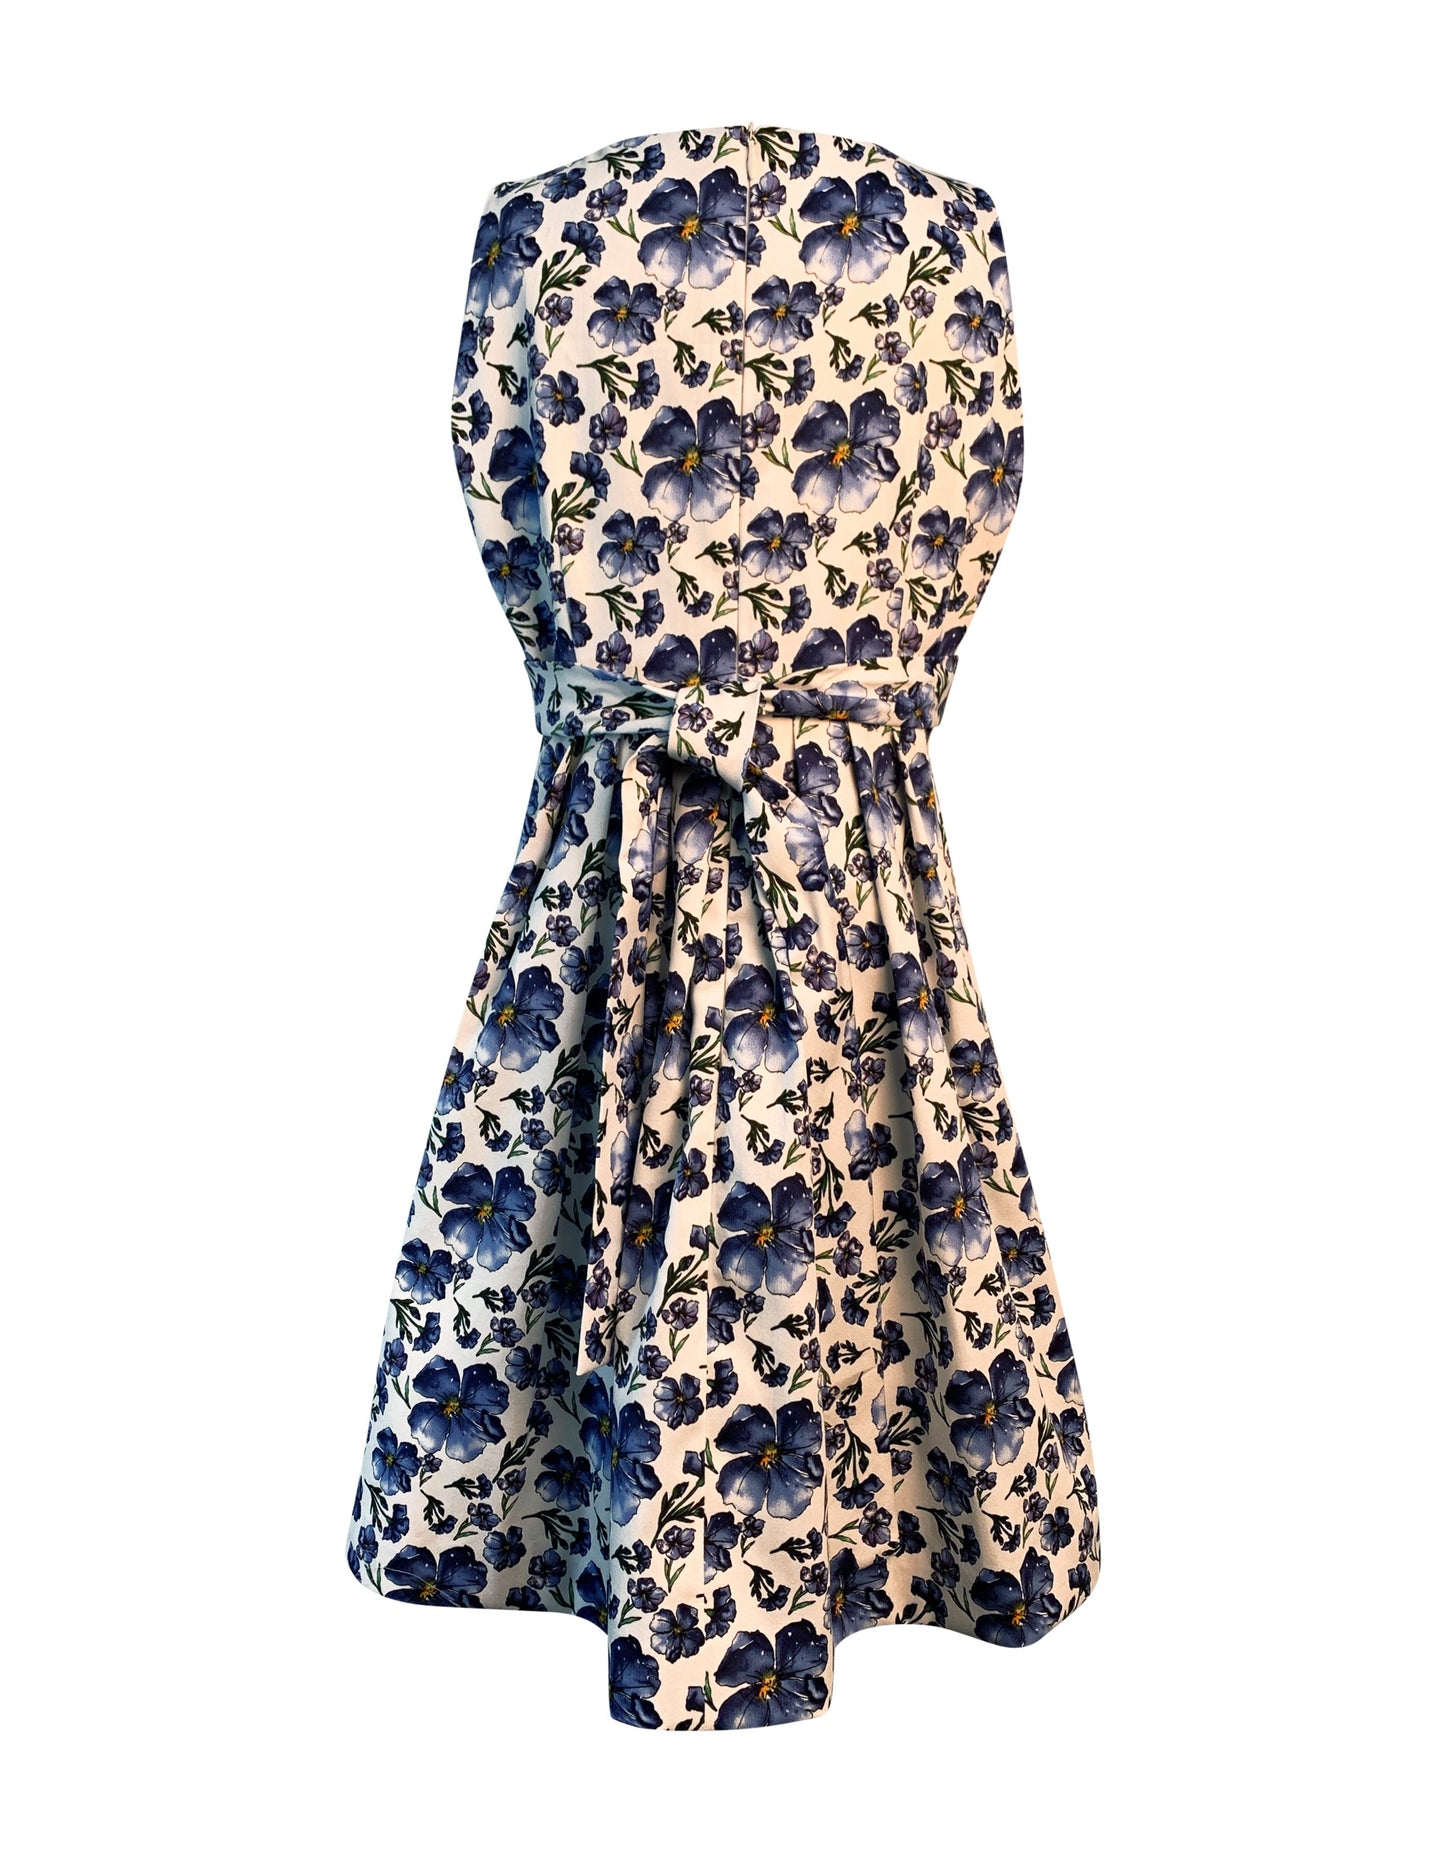 Helena and Harry Girl's Blue and White Print Dress